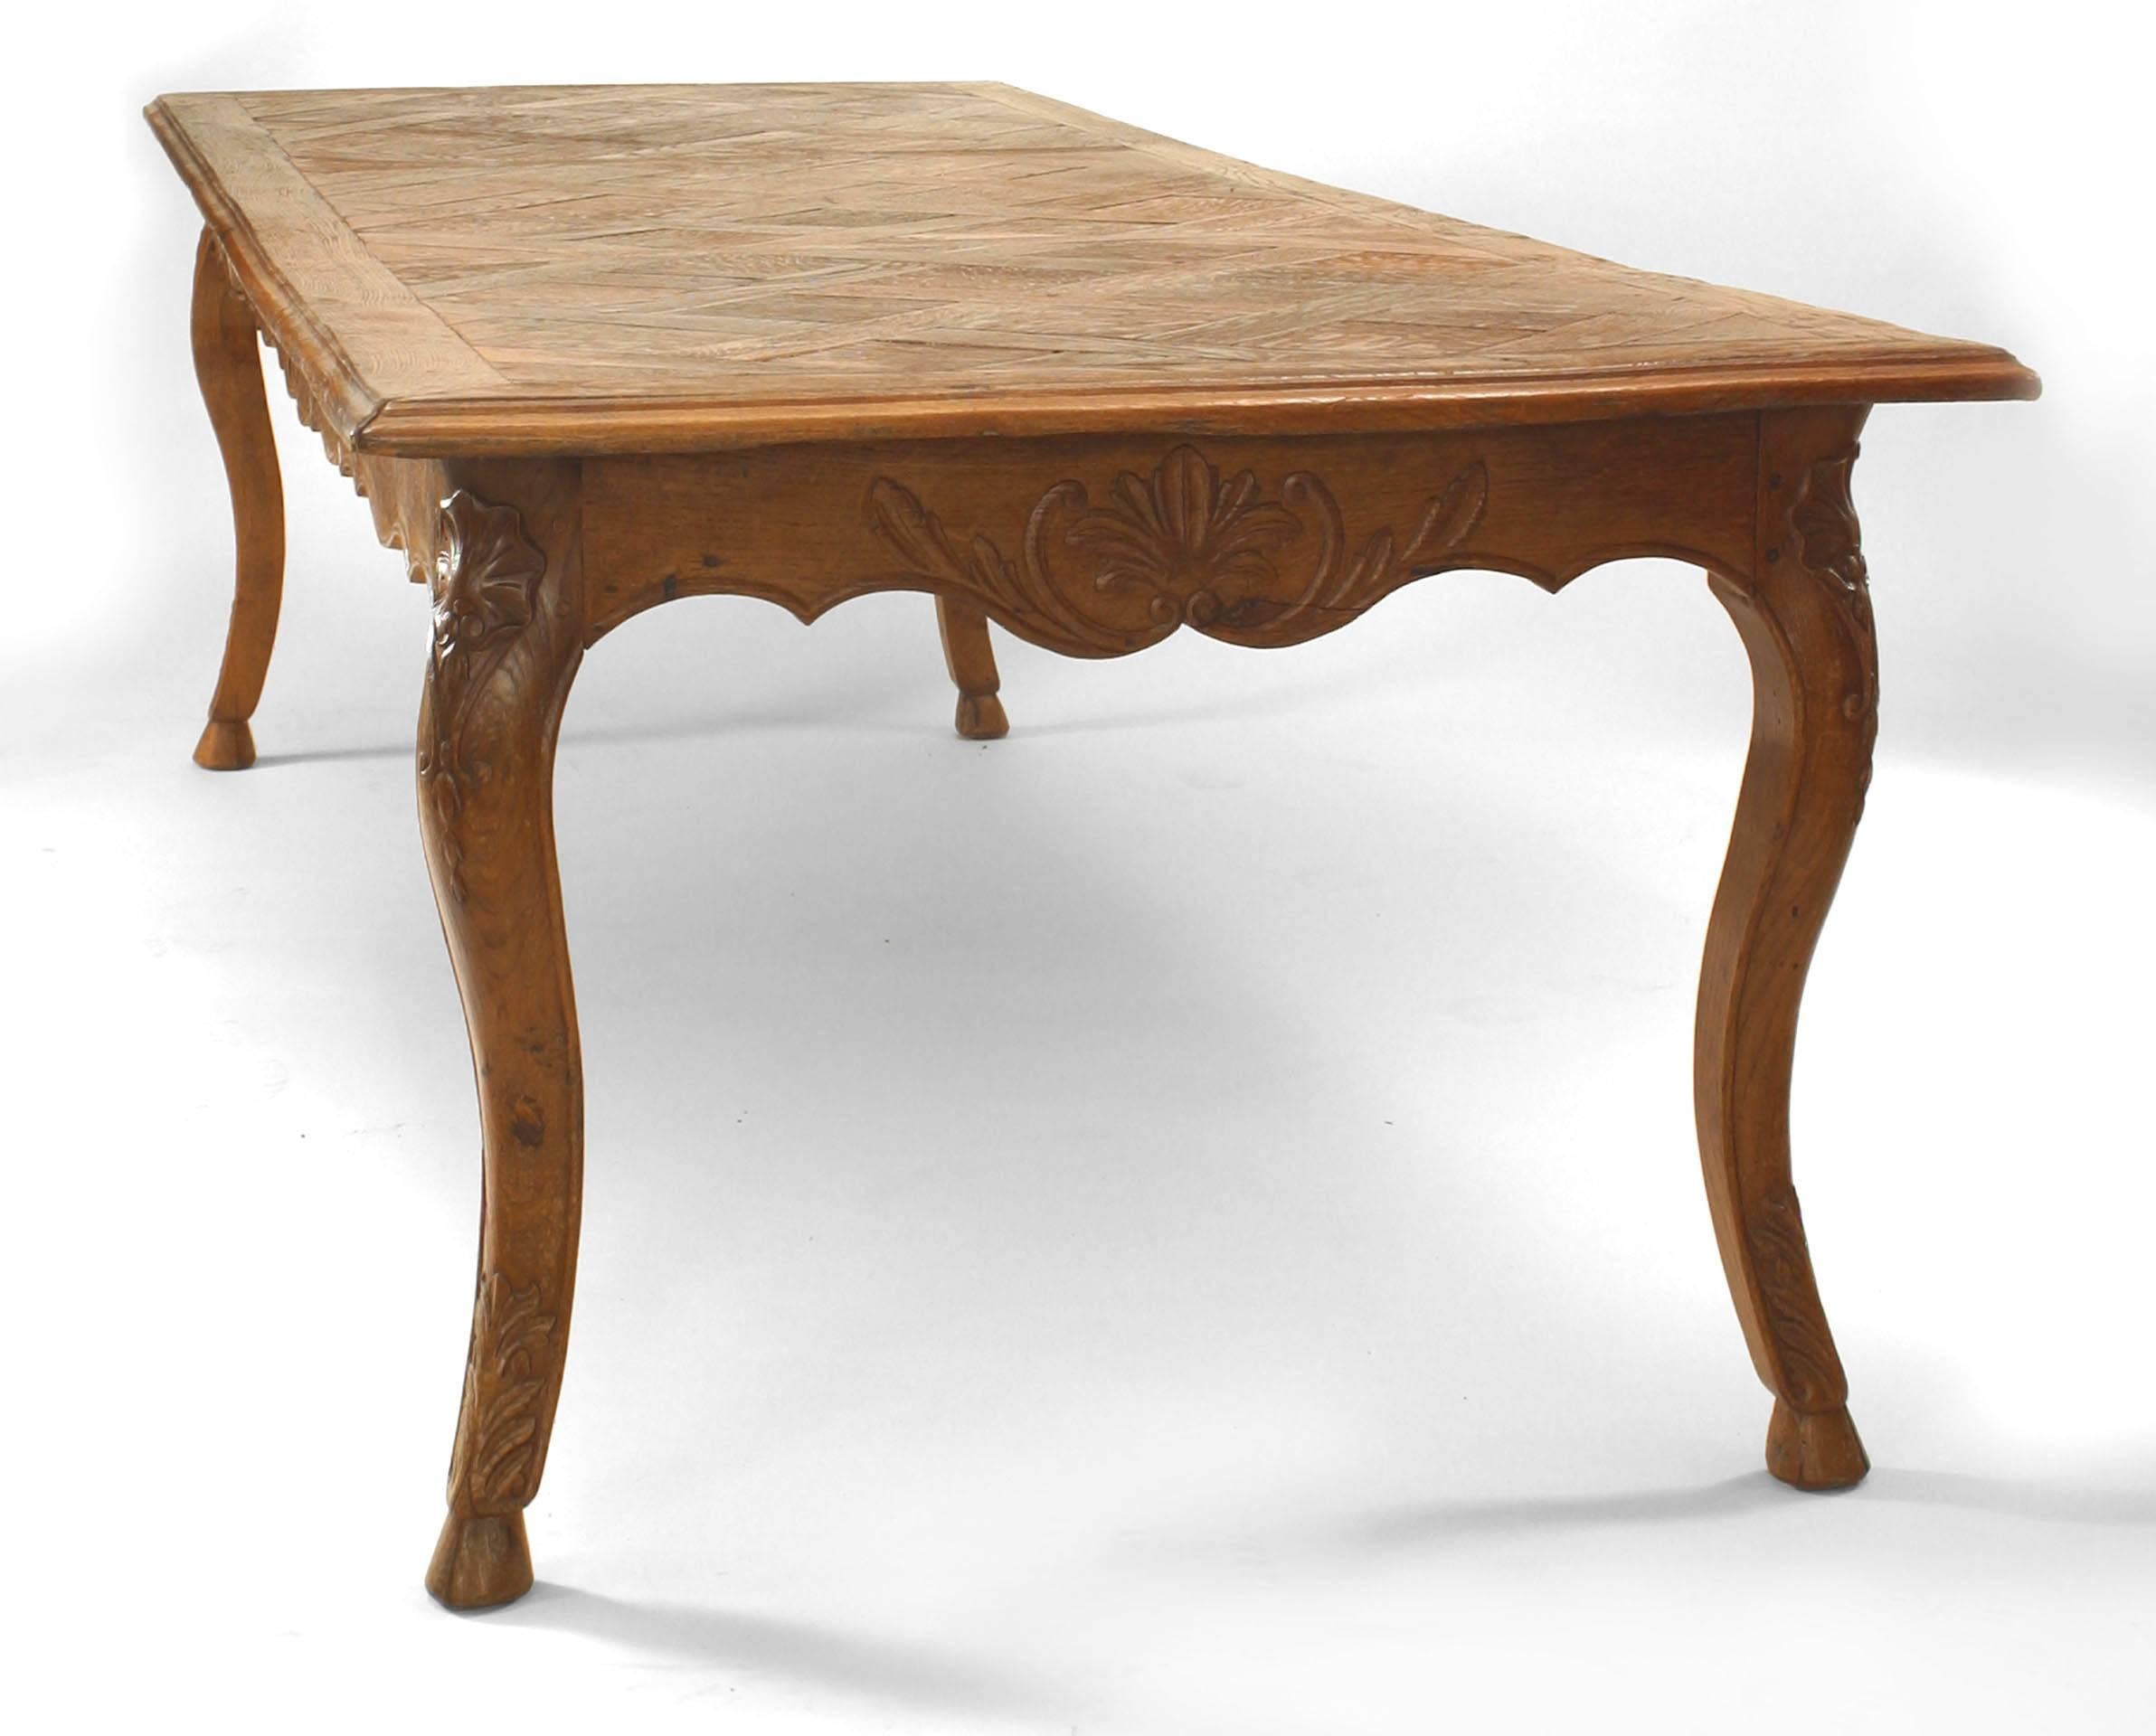 French Provincial-style (18/19th Century) oak dining table with parquetry top and carved apron
